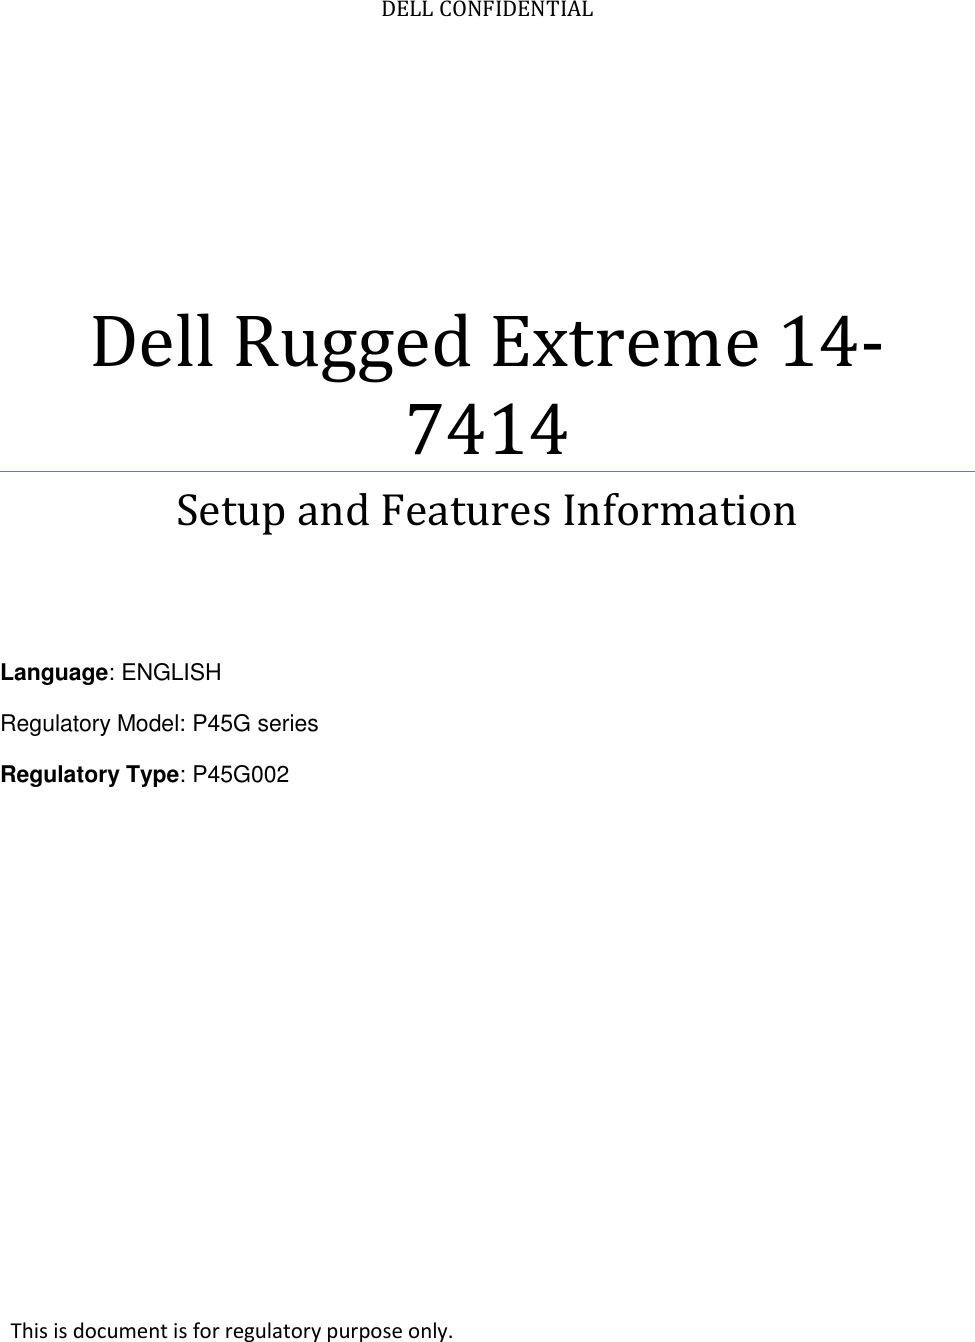    DELL CONFIDENTIAL Dell Rugged Extreme 14-7414 Setup and Features Information    Language: ENGLISH Regulatory Model: P45G series Regulatory Type: P45G002      This is document is for regulatory purpose only. 